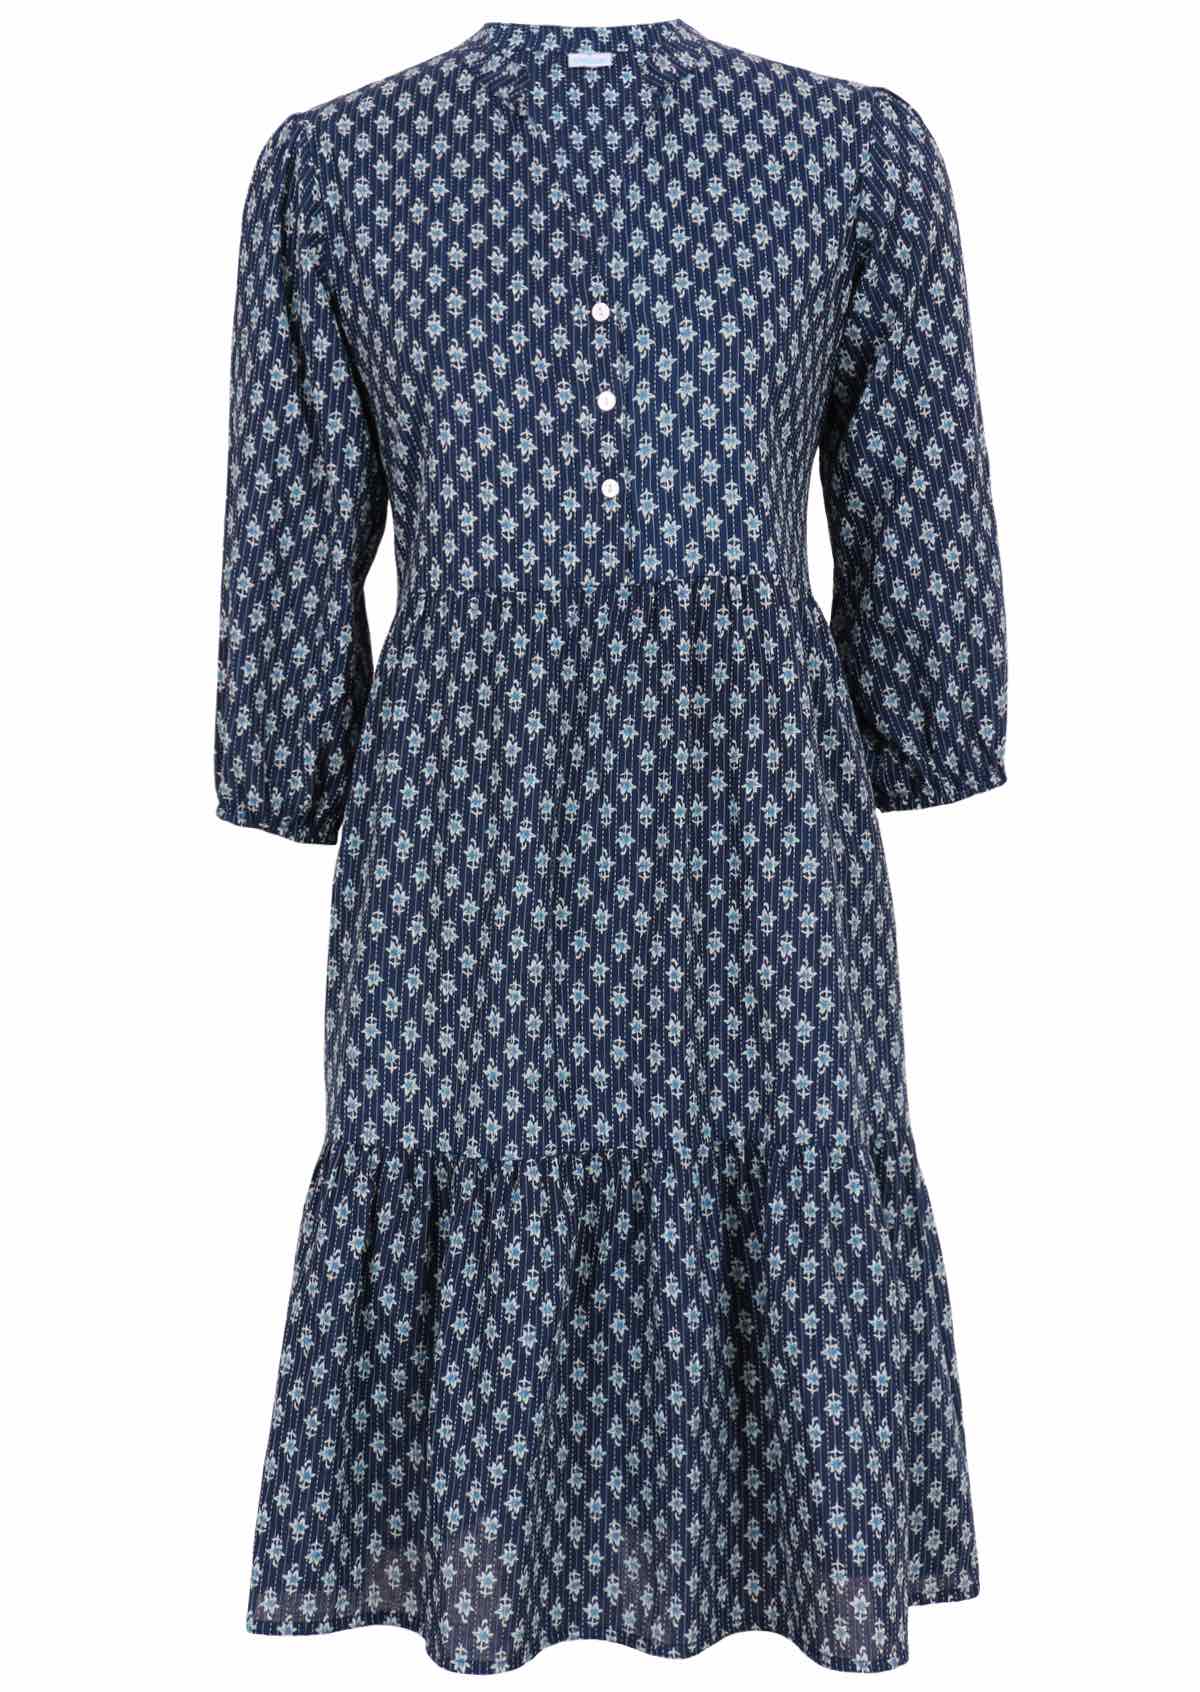 100% cotton midi dress with blue florals and Kantha stitches. 